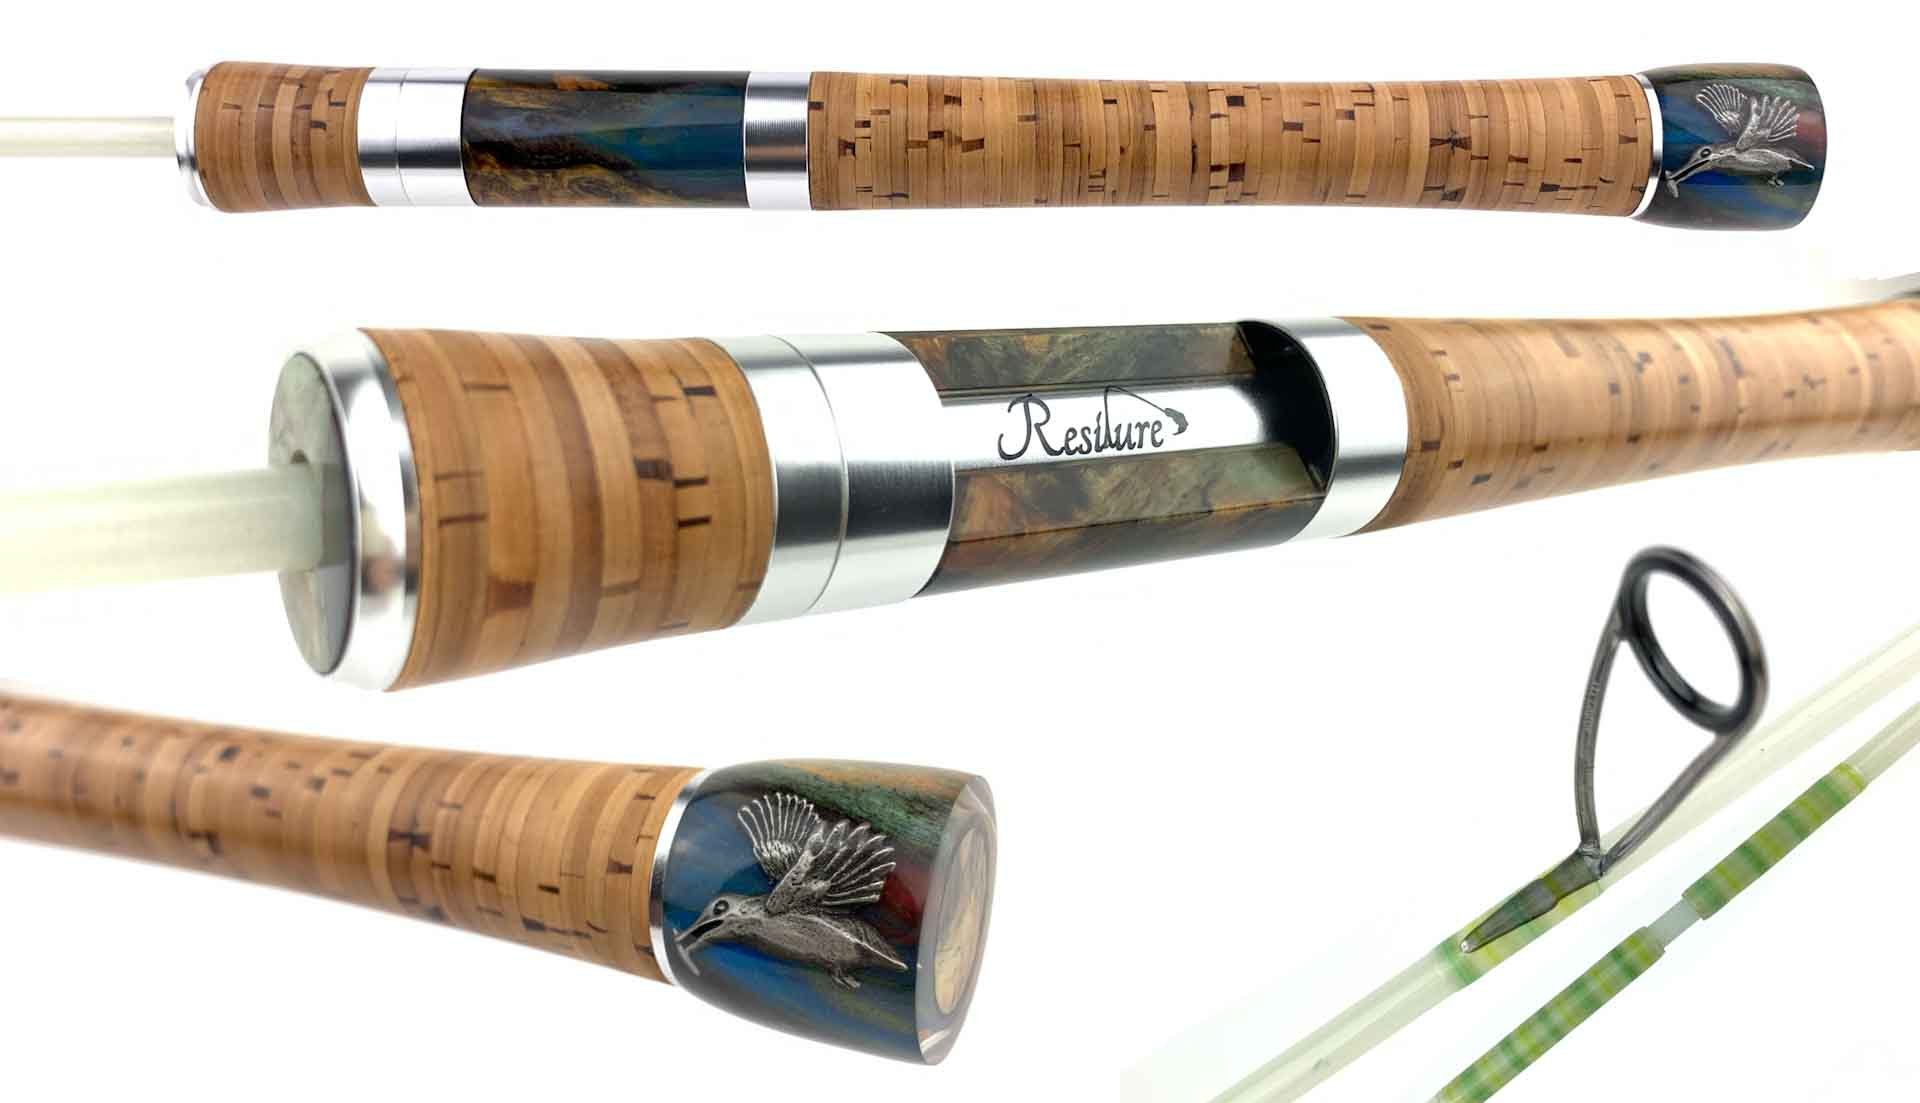 Custom trout s-glass bfs rods, Resilure Custom fishing rods